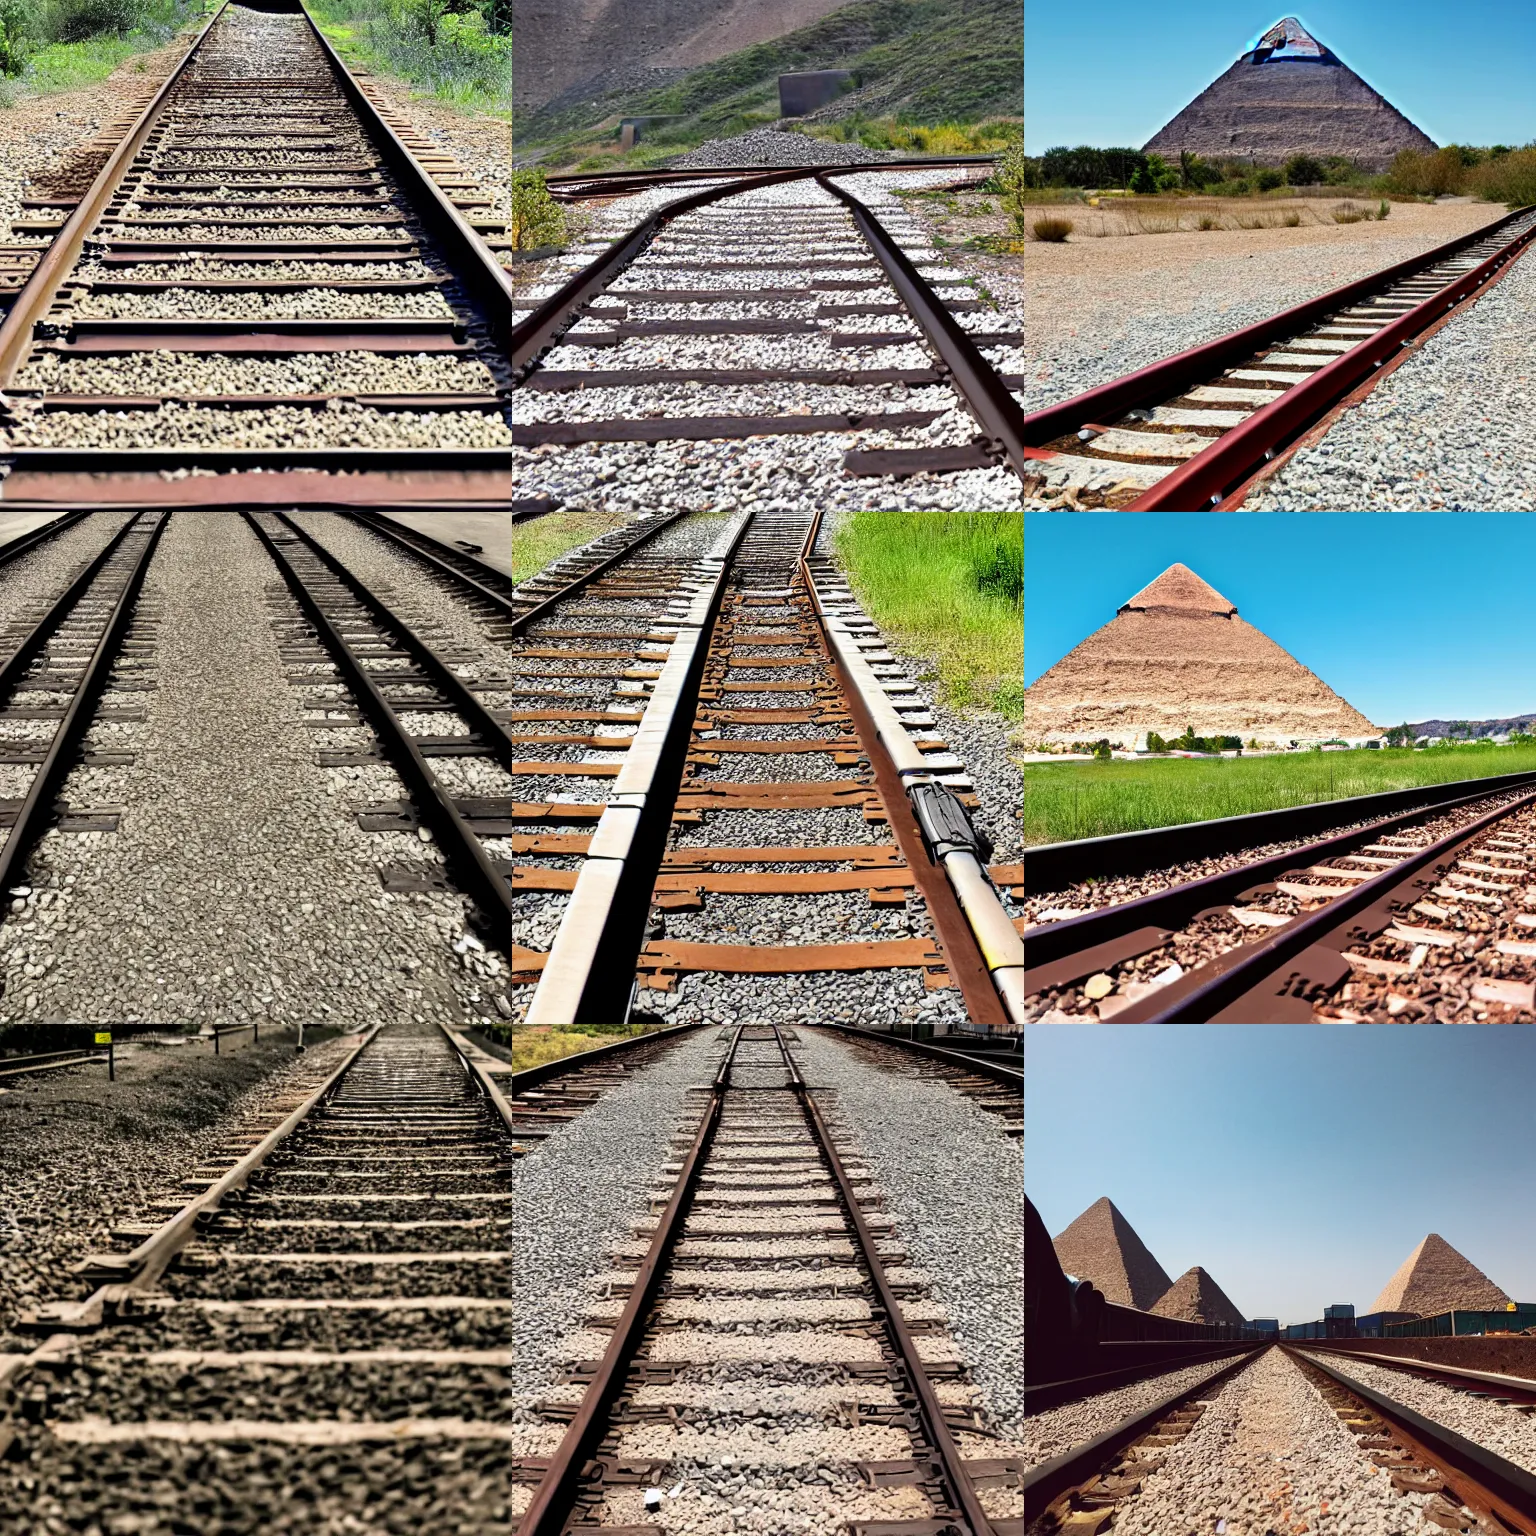 Prompt: the train tracks are lined up in front of the pyramid